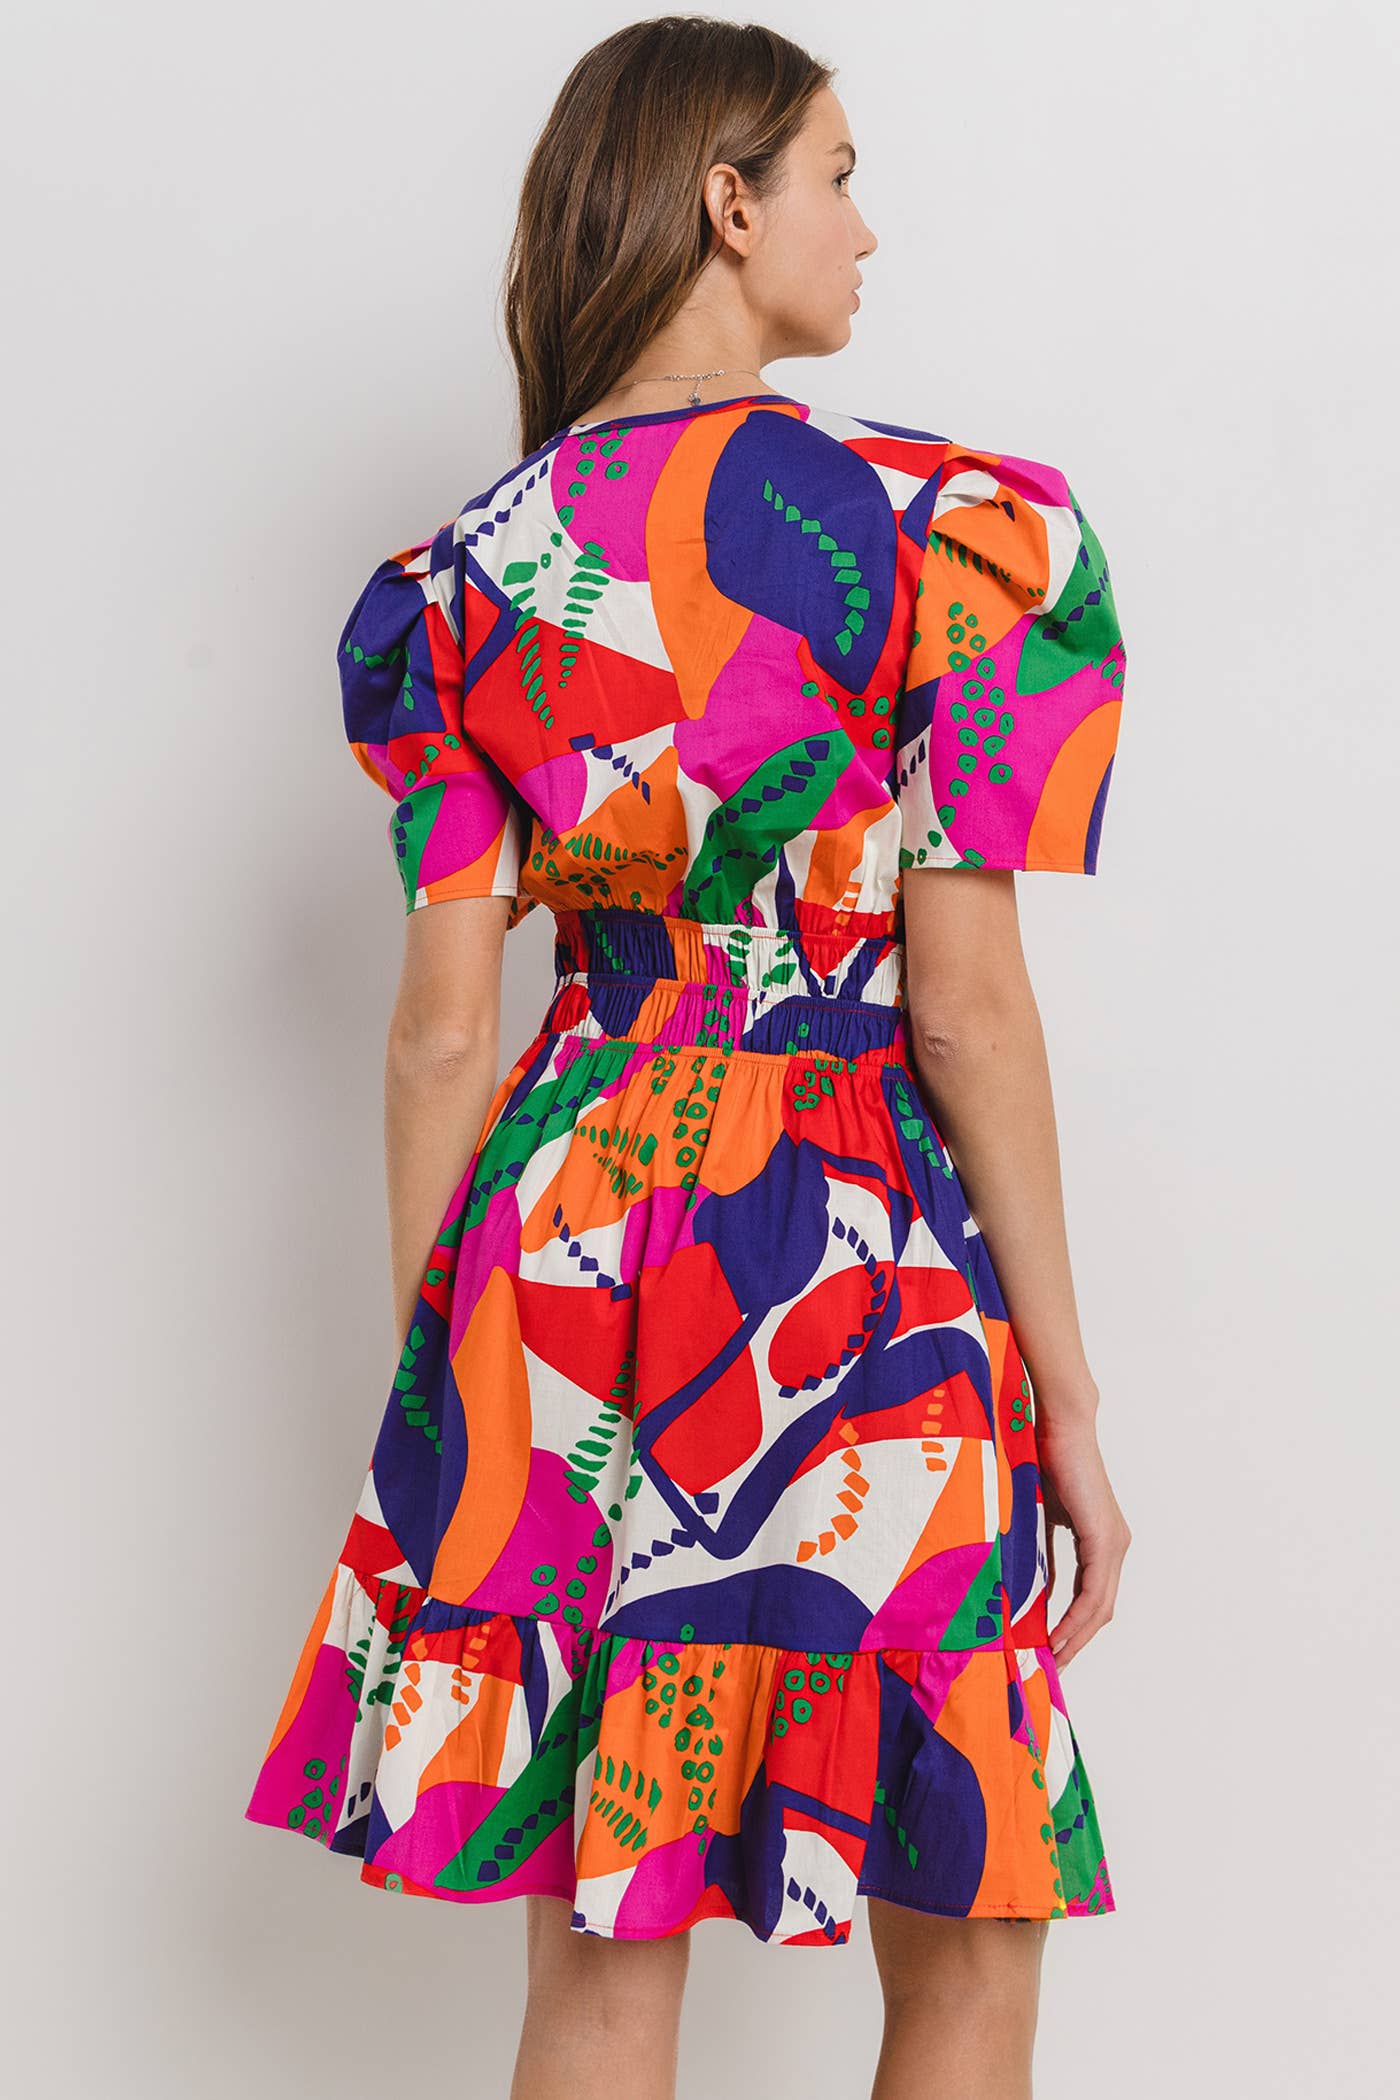 back view of model wearing a tropical printed dress with puffy sleeves